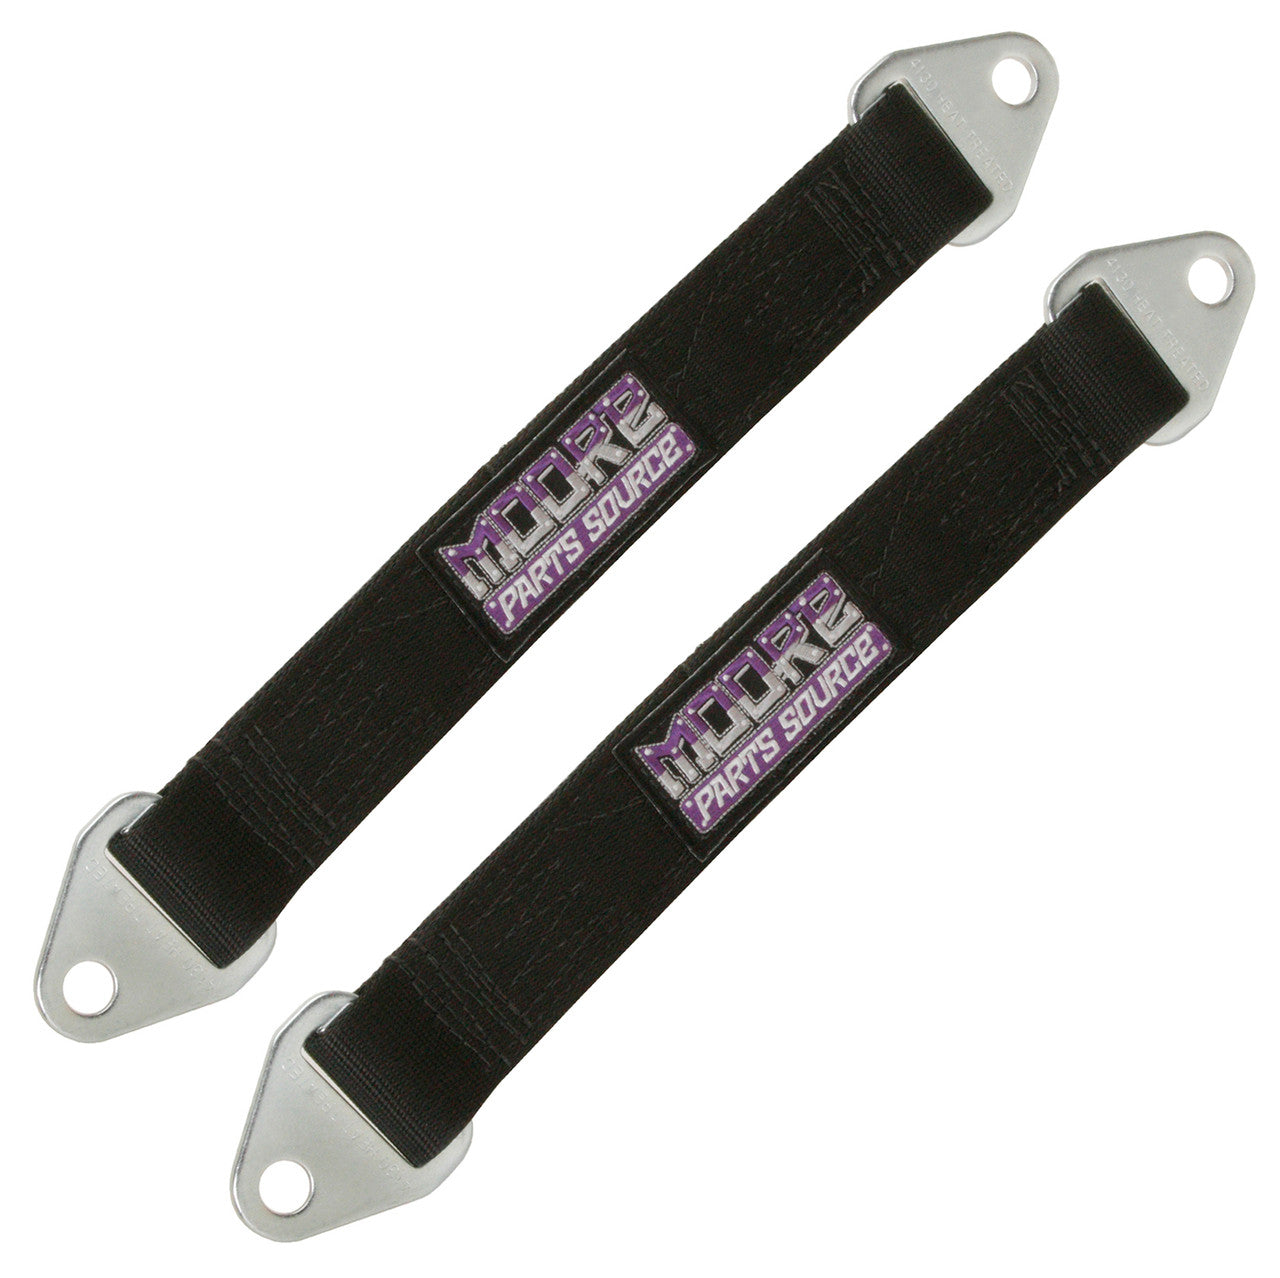 11 Inch USA Made Off-Road Suspension Limit Straps, Sold As Pair